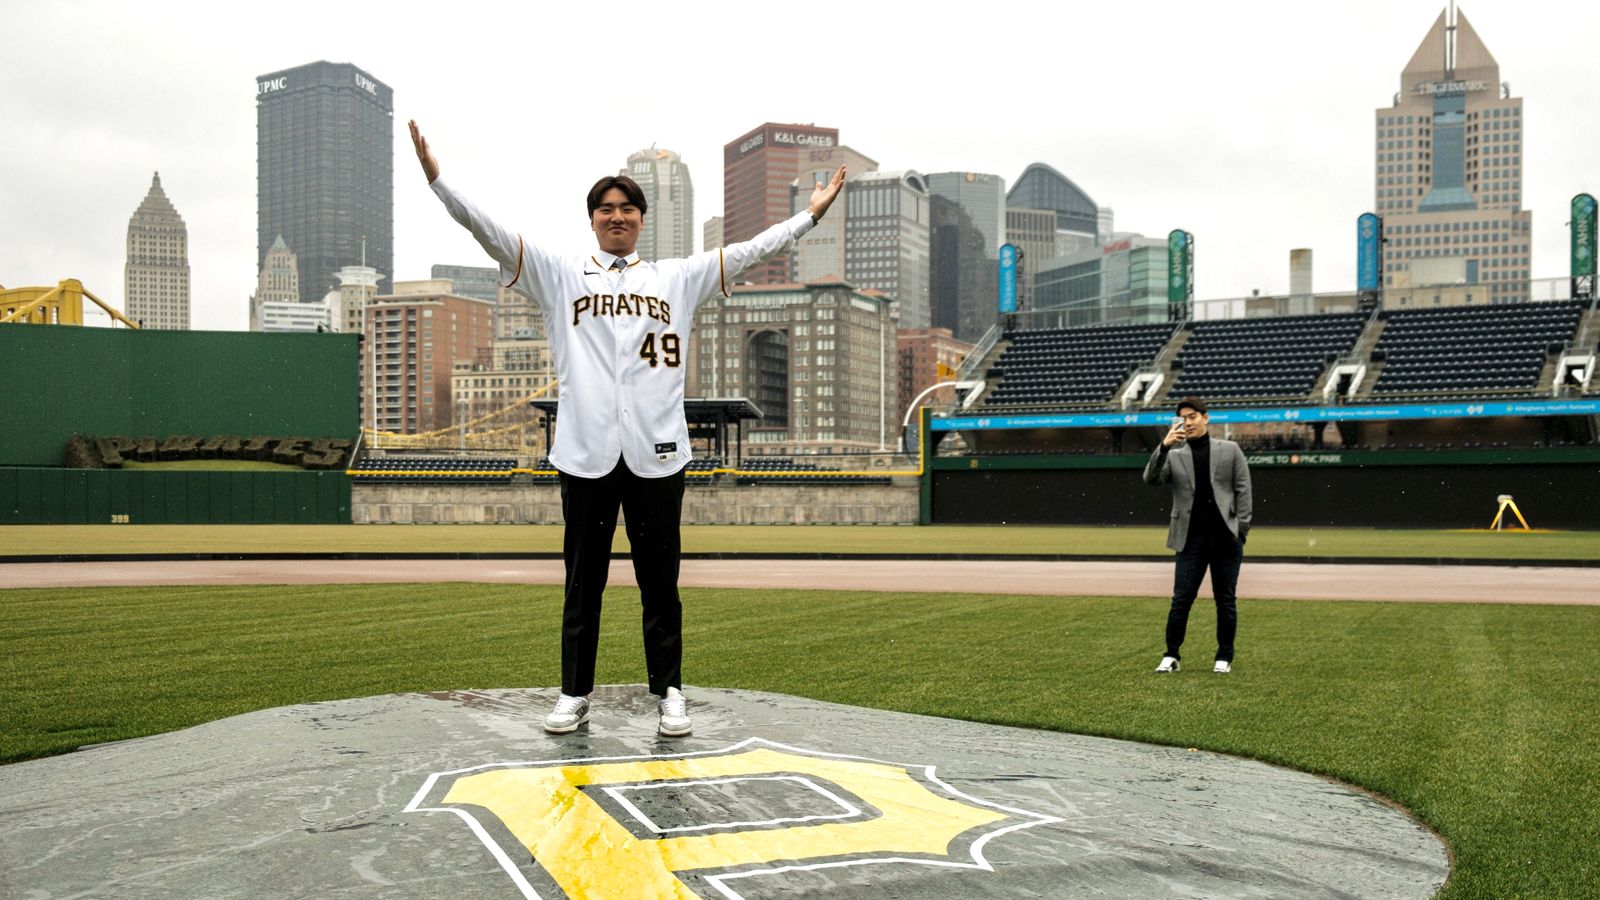 Yesterday was Kids Day at PNC Park. - Pittsburgh Pirates